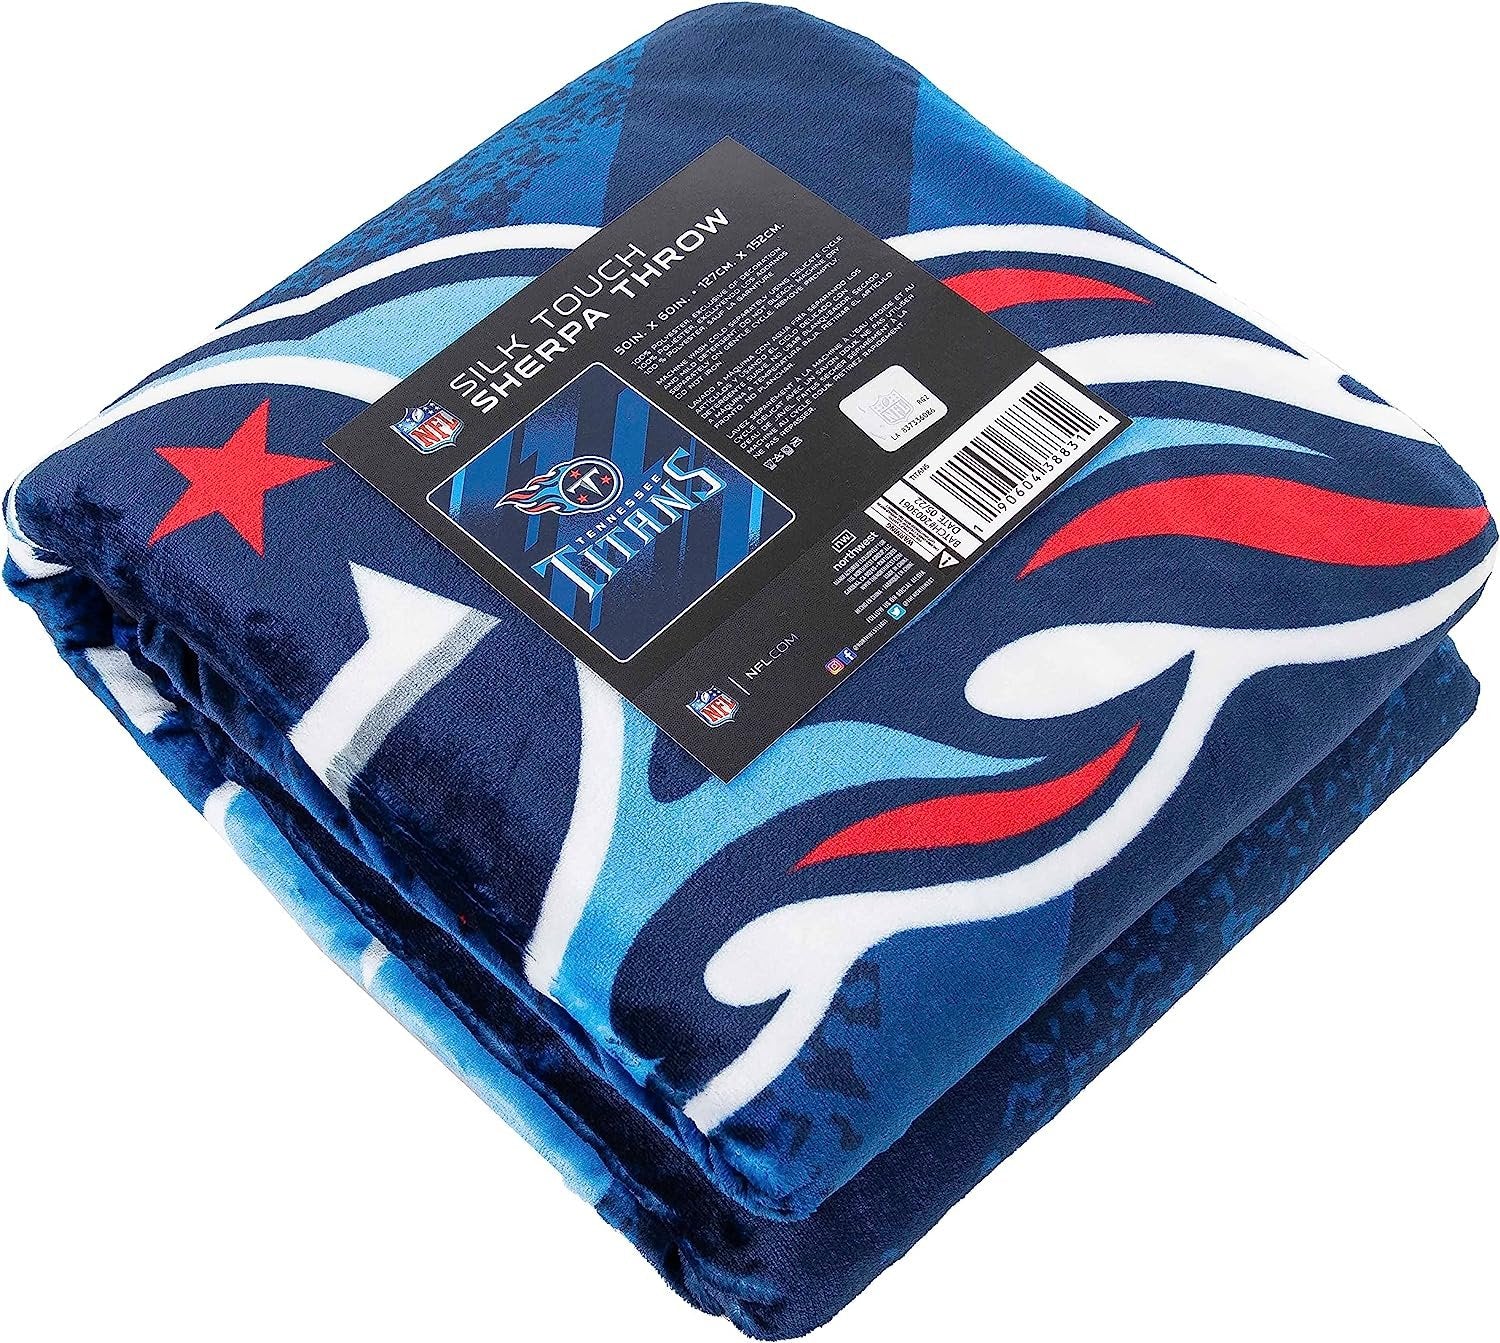 Tennessee Titans Throw Blanket, Sherpa Raschel Polyester, Silk Touch Style, Velocity Design, 50x60 Inch